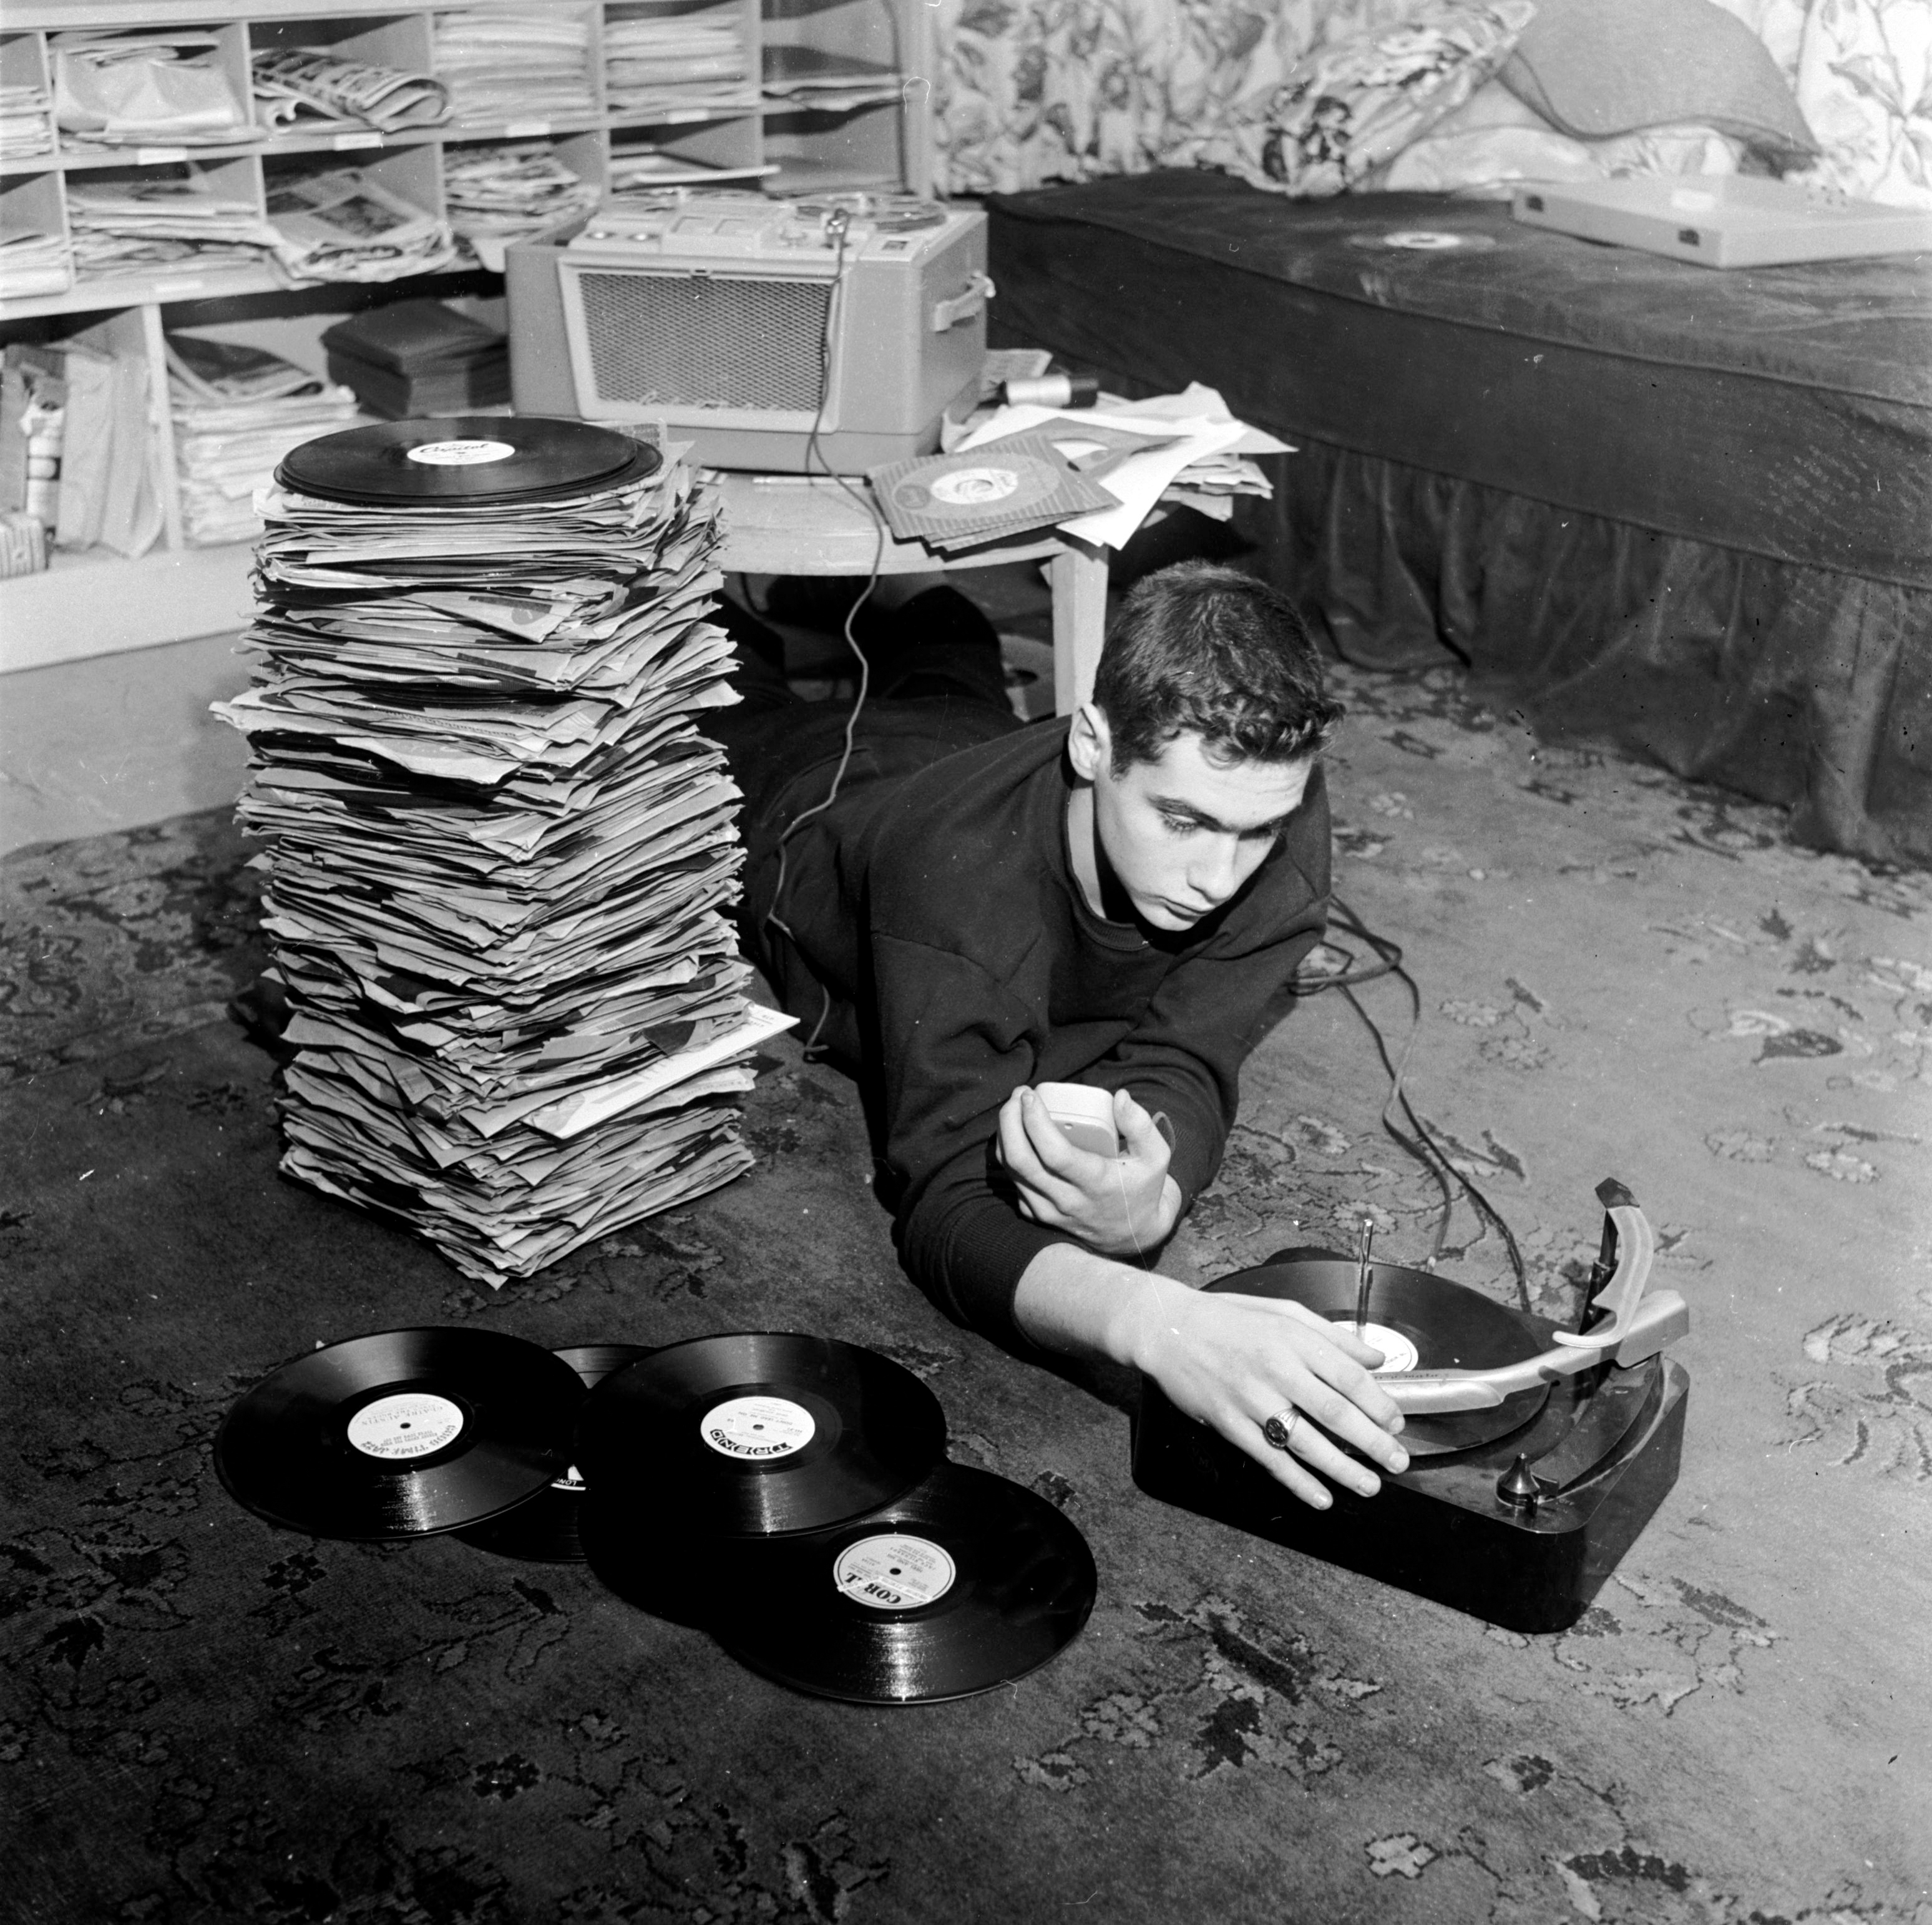 A record lover.